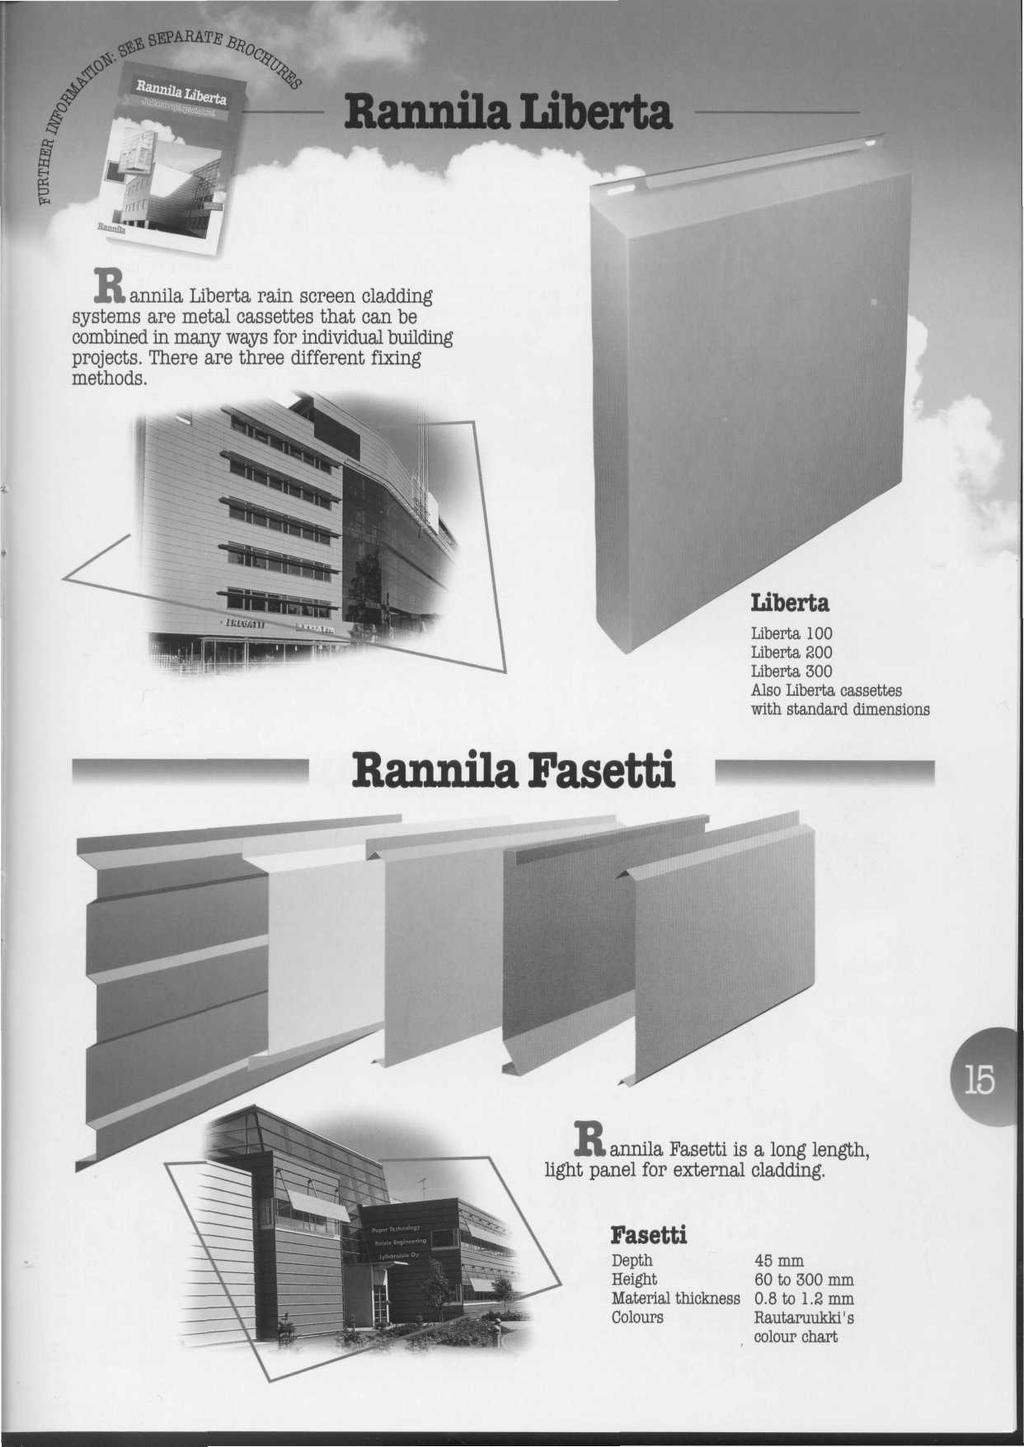 Rannila Liberta R. annila Liberta rain screen cladding systems are metal cassettes that can be combined in many ways for individual building projects. There are three different fixing methods.